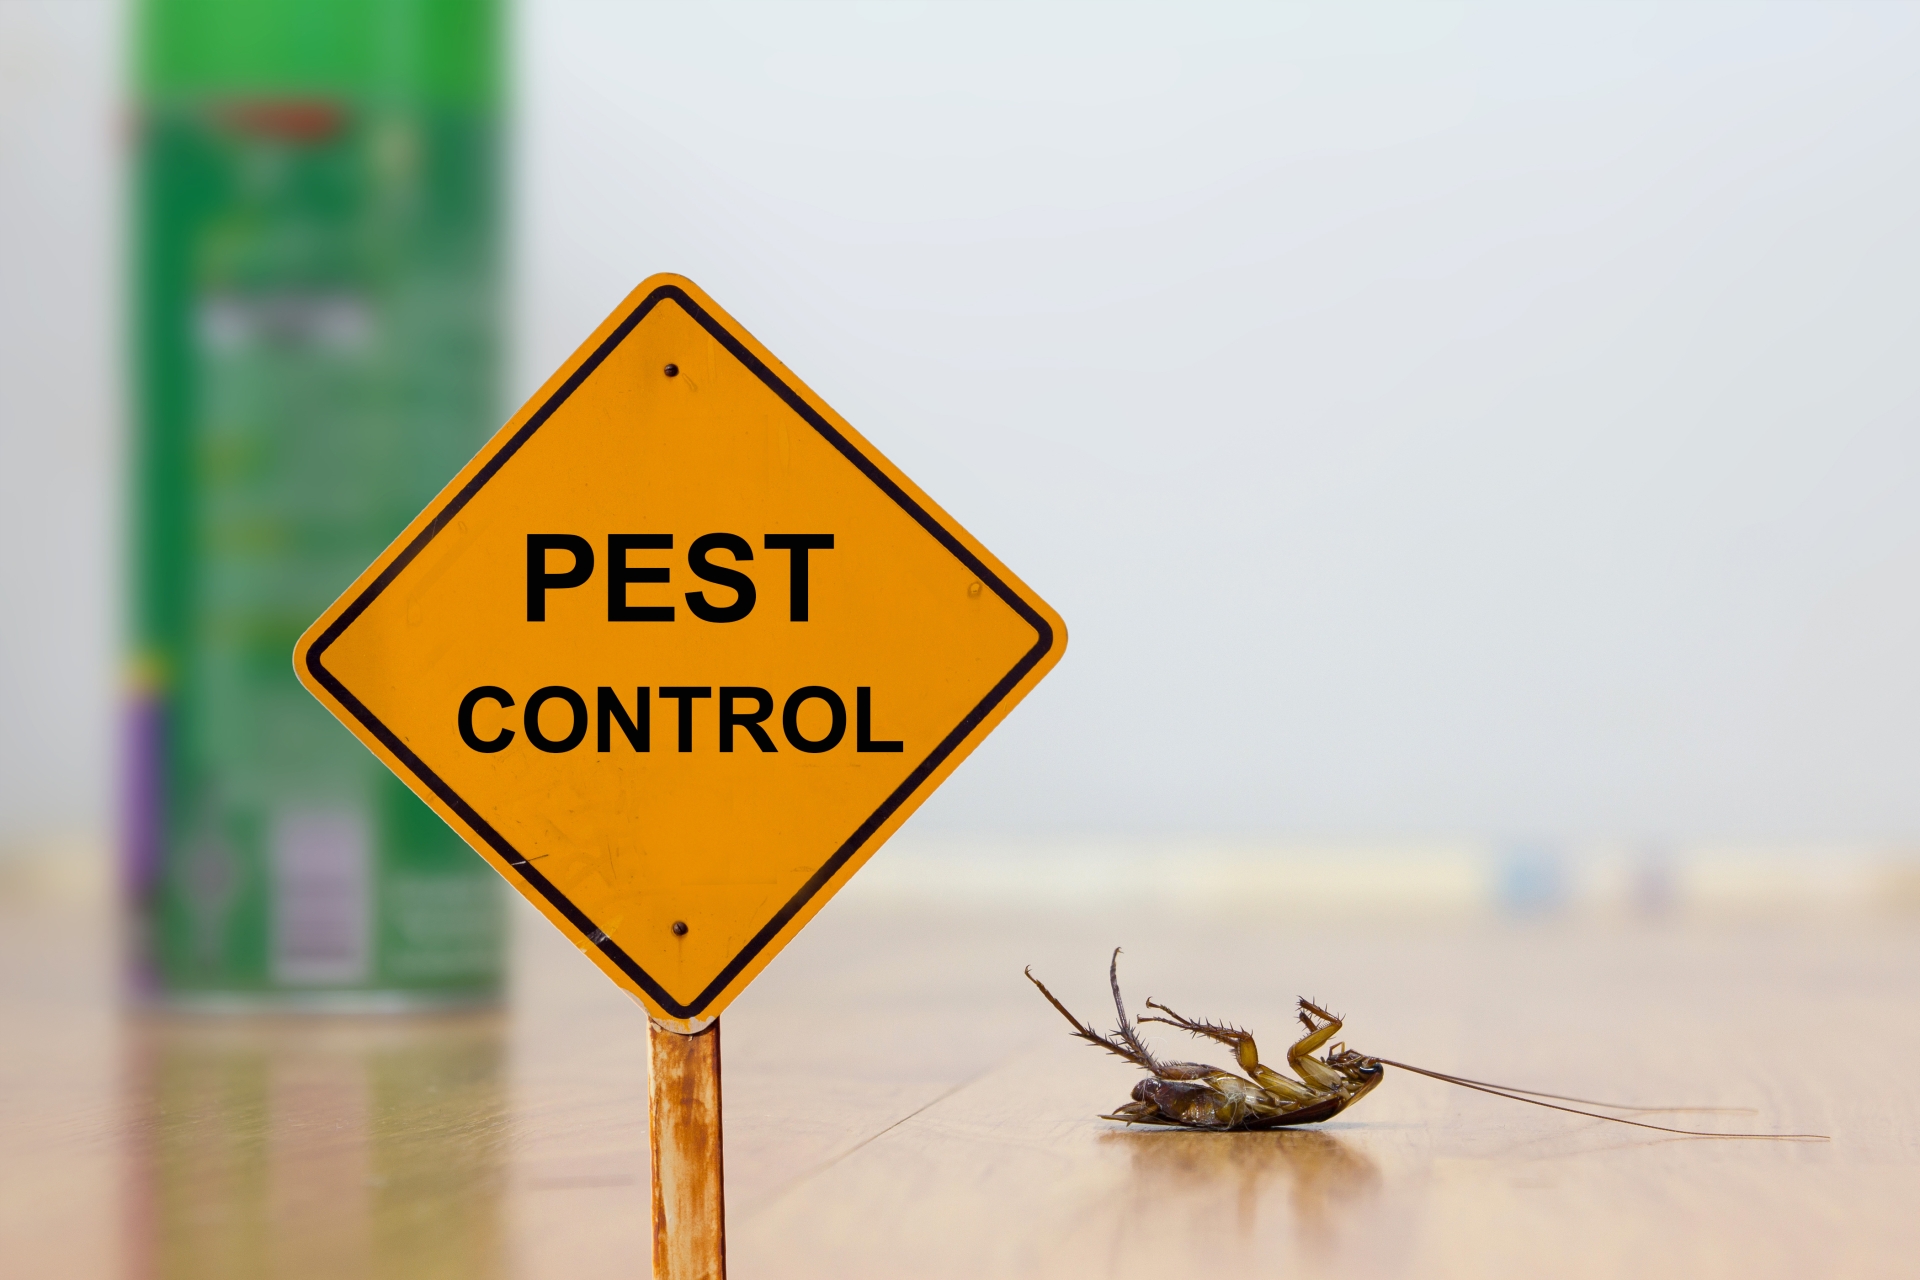 24 Hour Pest Control, Pest Control in North Cheam, Stonecot Hill, SM3. Call Now 020 8166 9746